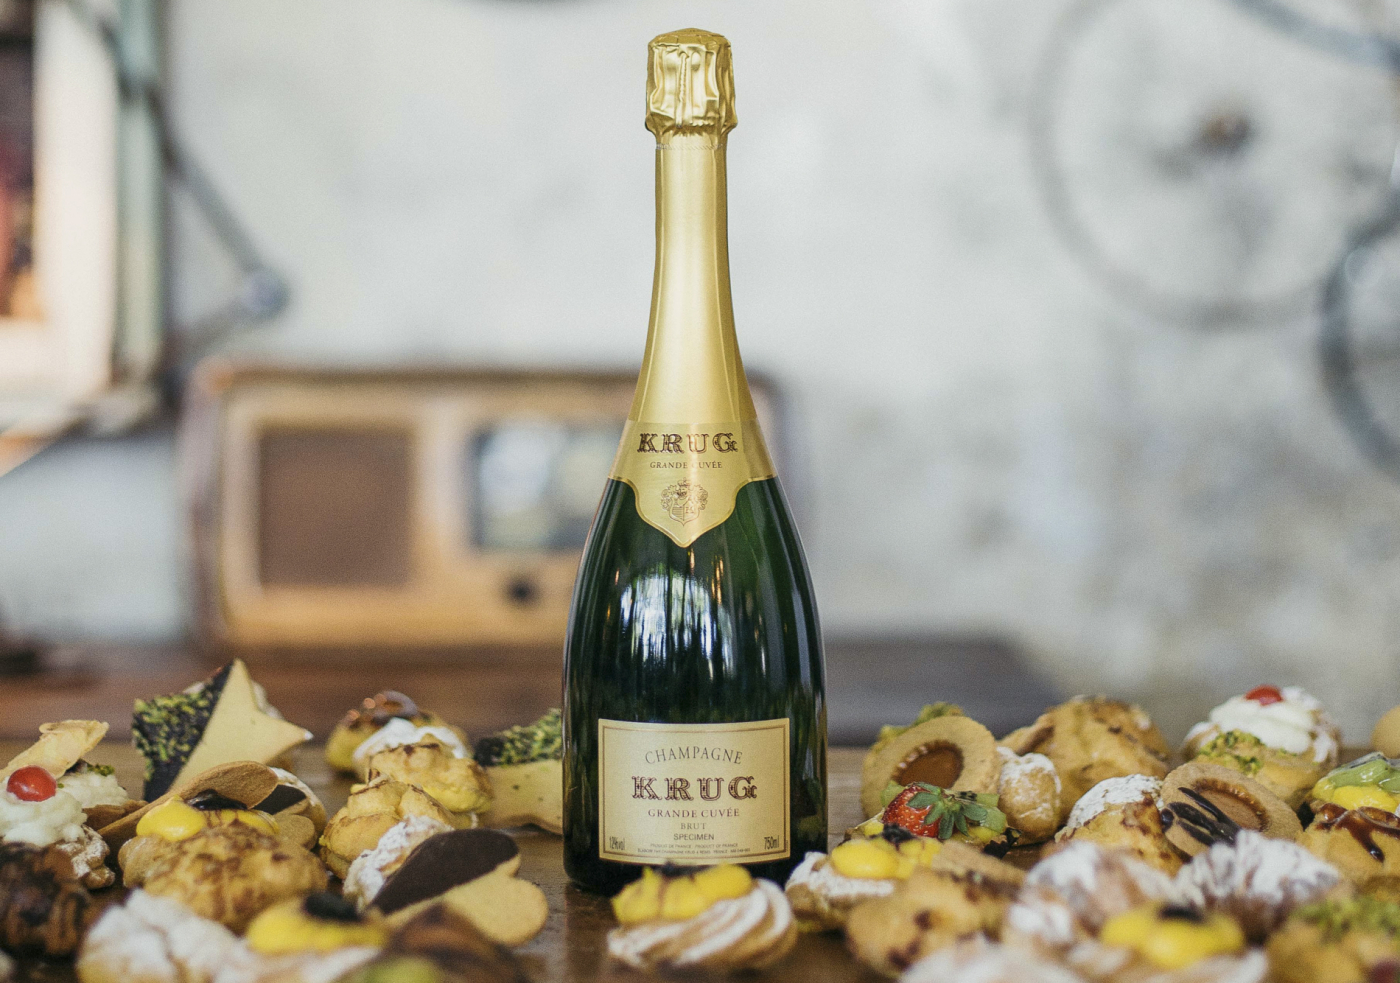 The empire built on bubbles: champagne law according to Krug